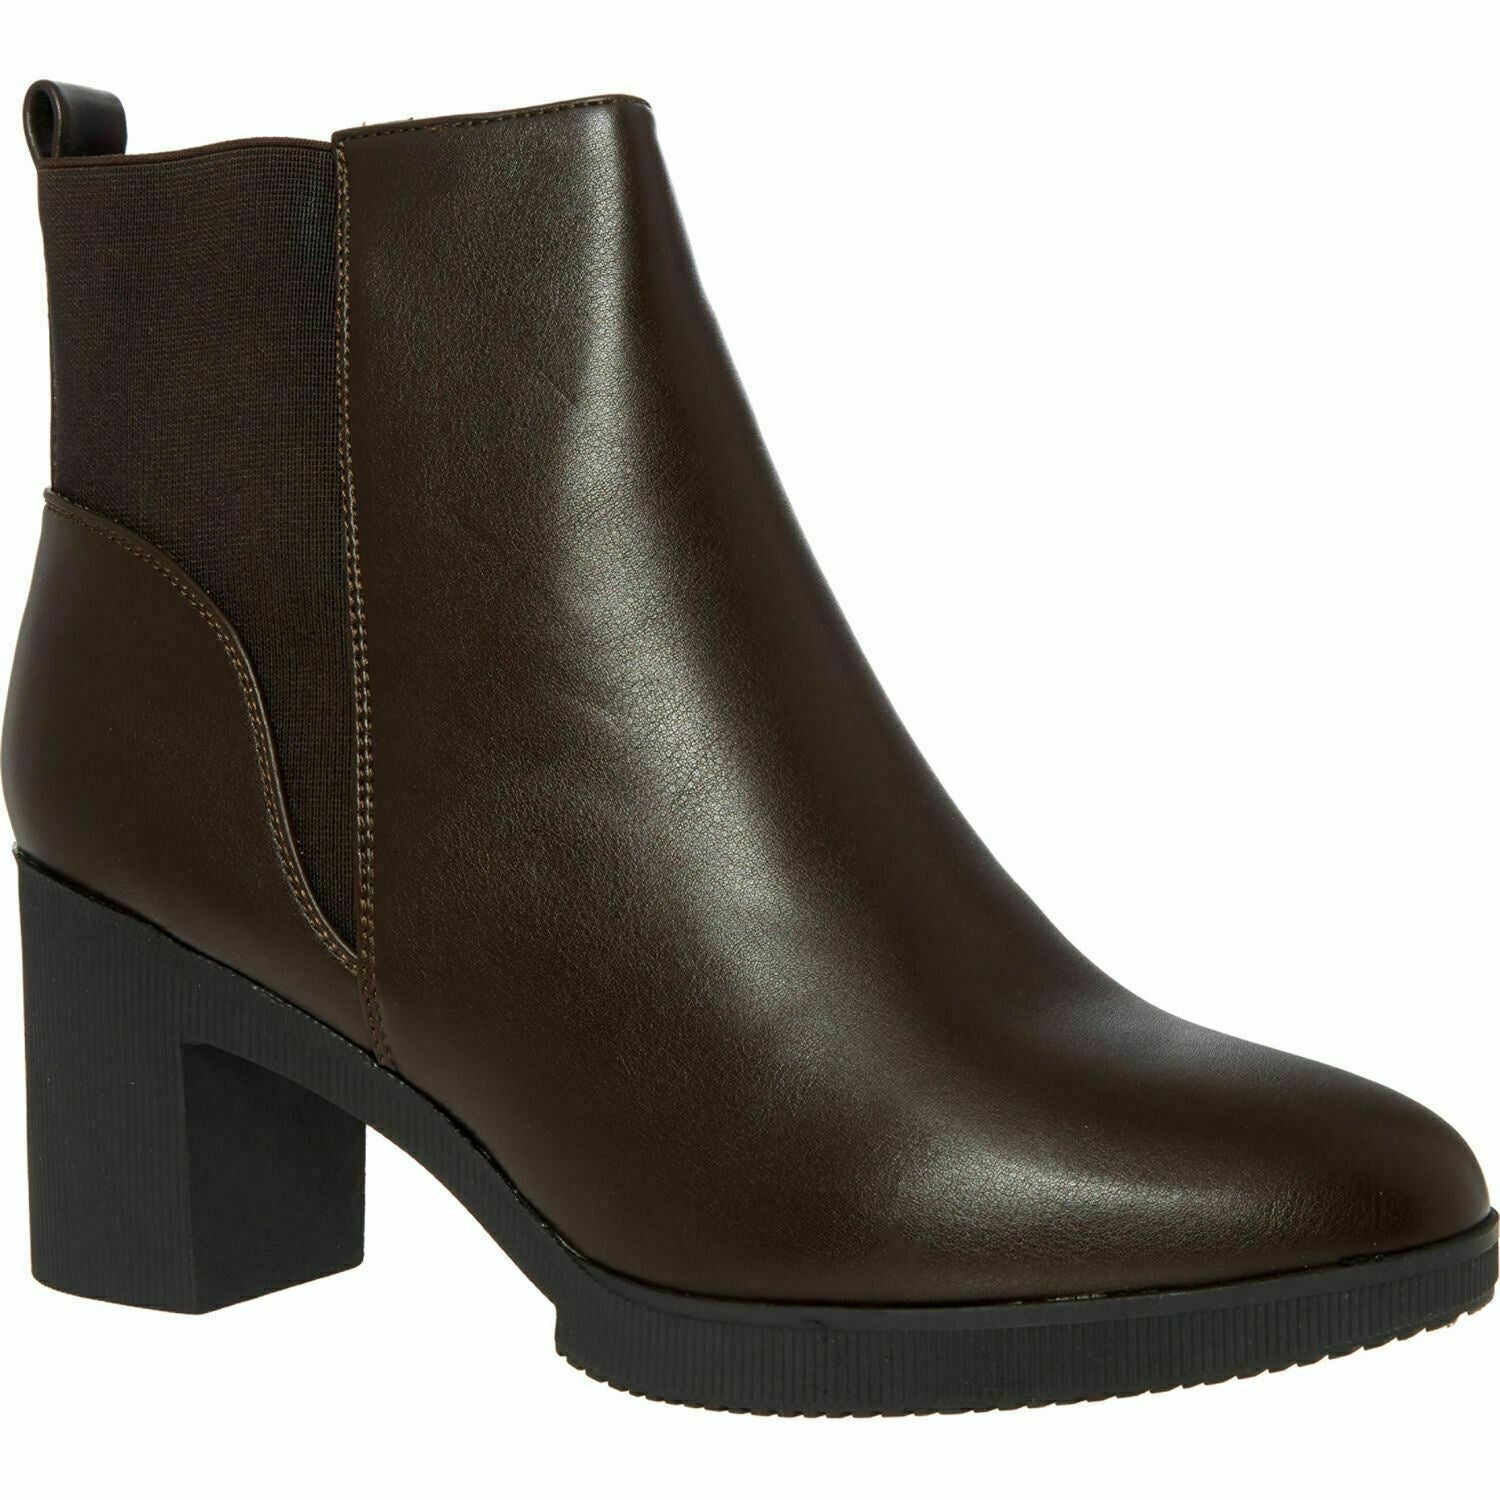 KYLIE CRAZY SHOES Women's Heeled Chelsea Boots, Maroon Brown, size UK 7 / EU 40